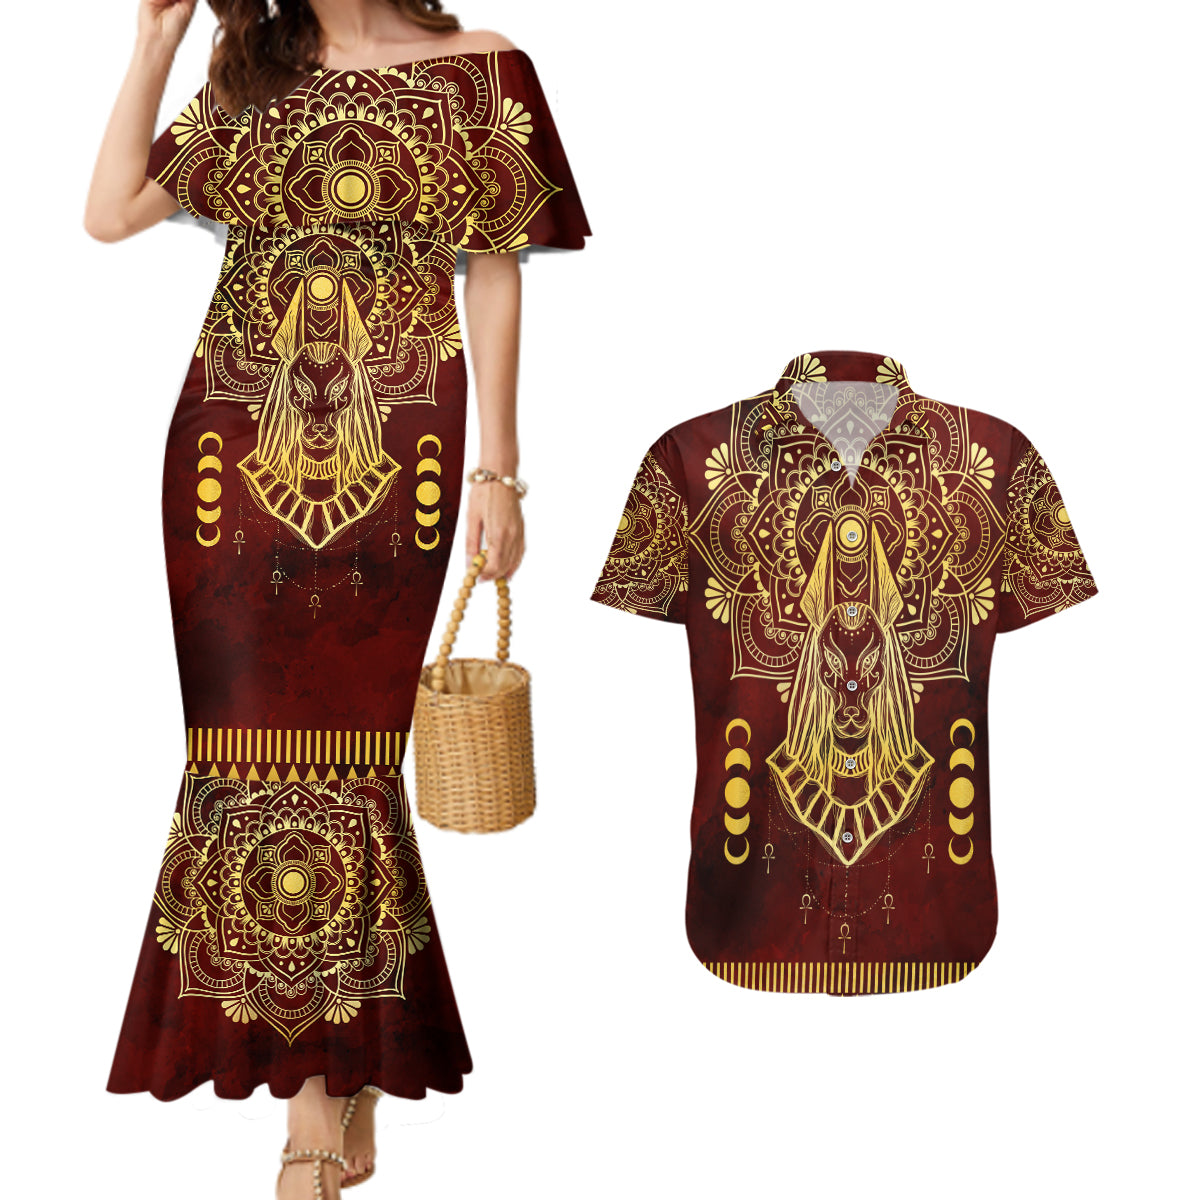 Personalized Anubis Couples Matching Mermaid Dress and Hawaiian Shirt Ancient Egyptian Pattern In Red